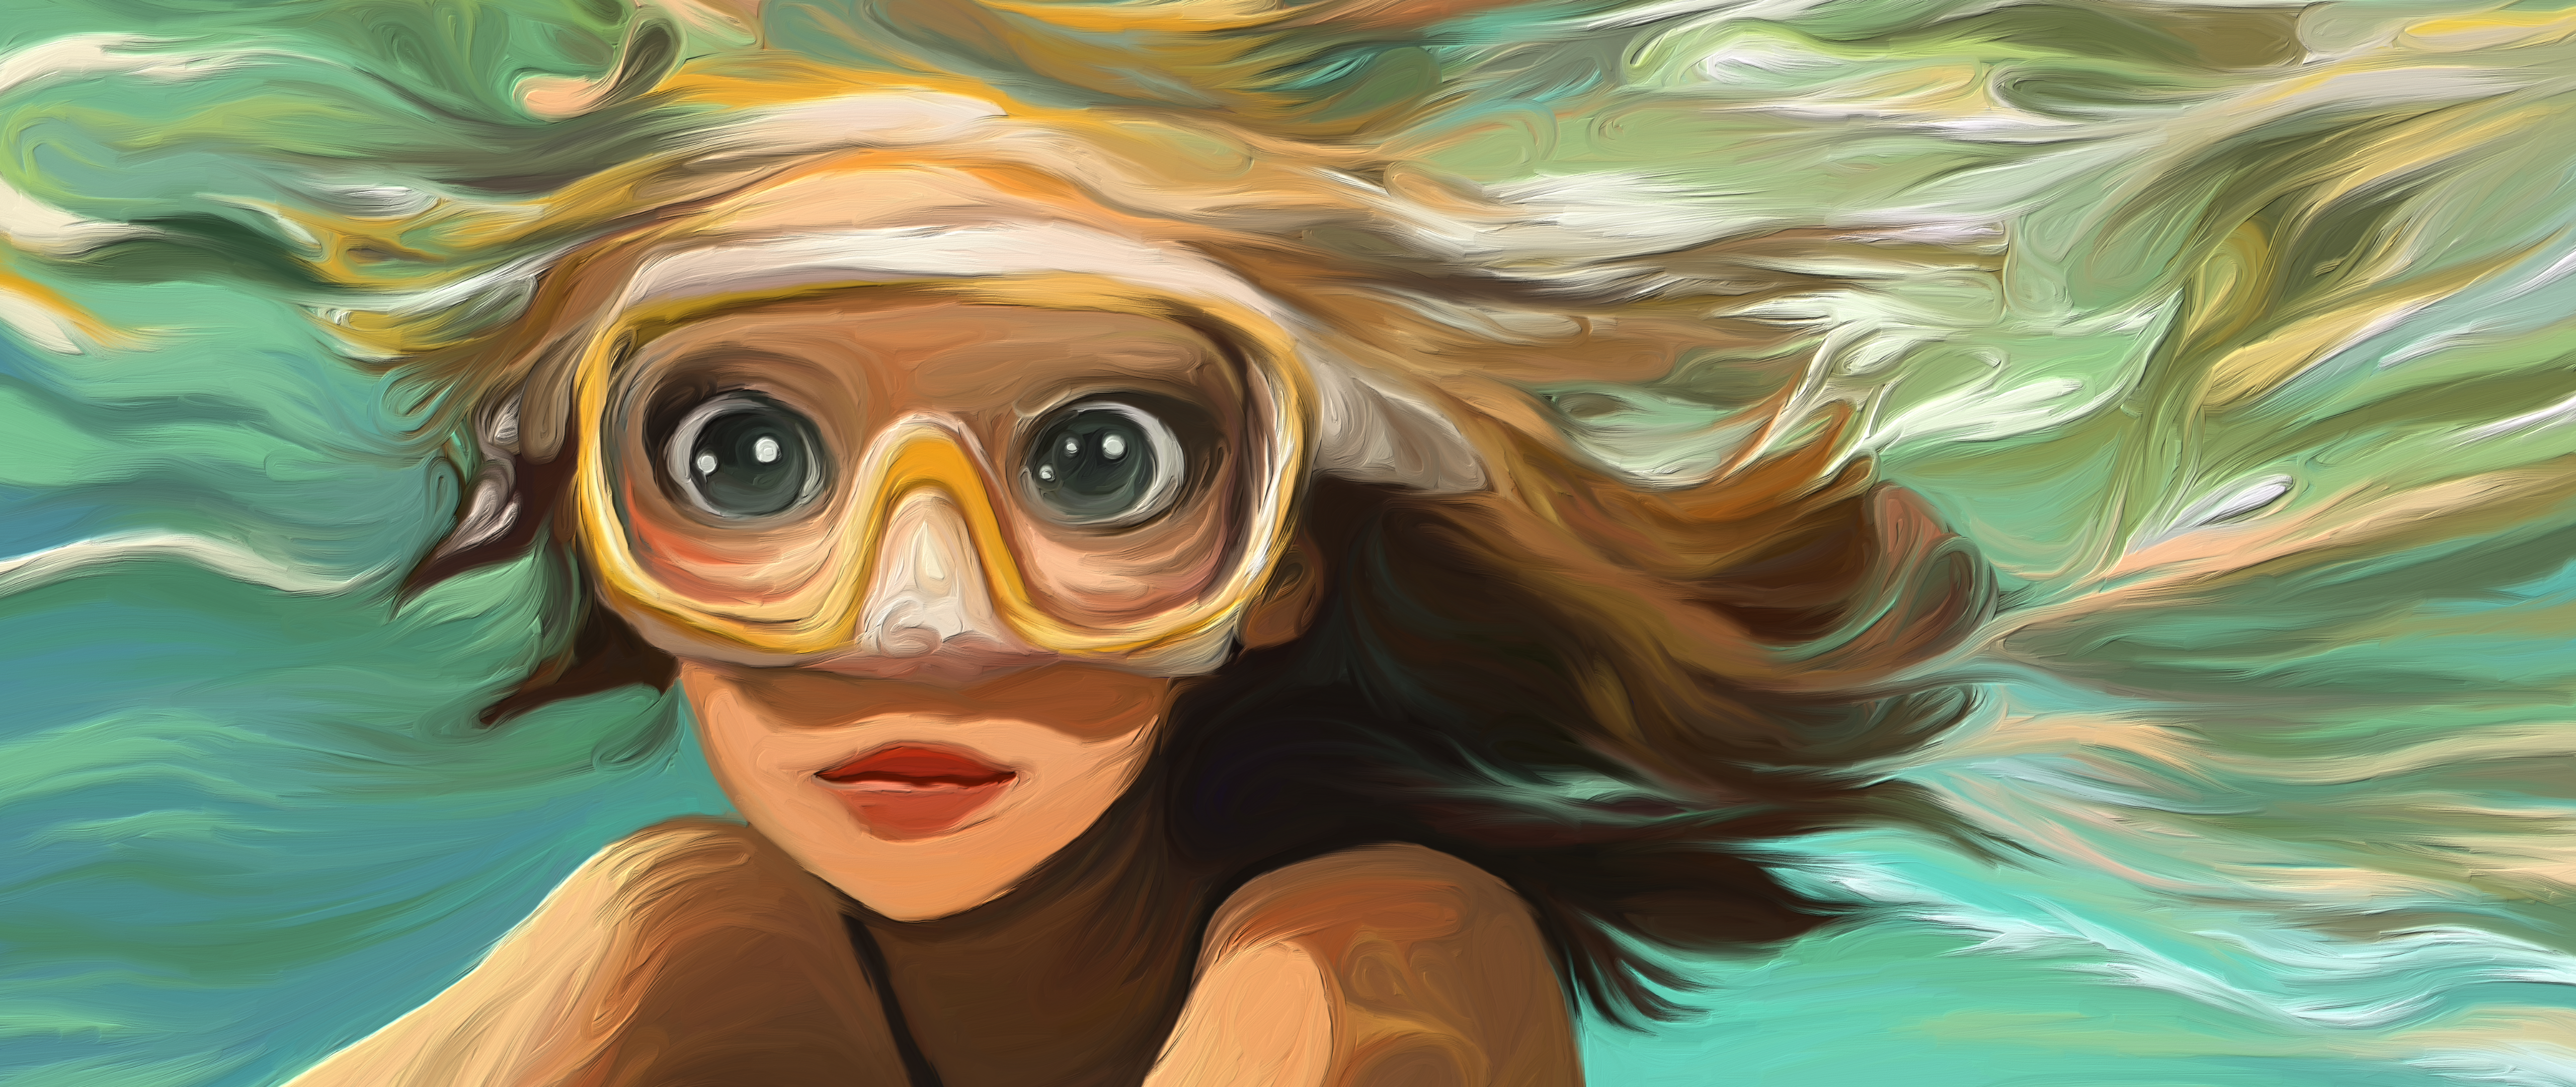 Digital Art Oil On Canvas Underwater Women Water Swimming Goggles Looking At Viewer 5120x2160